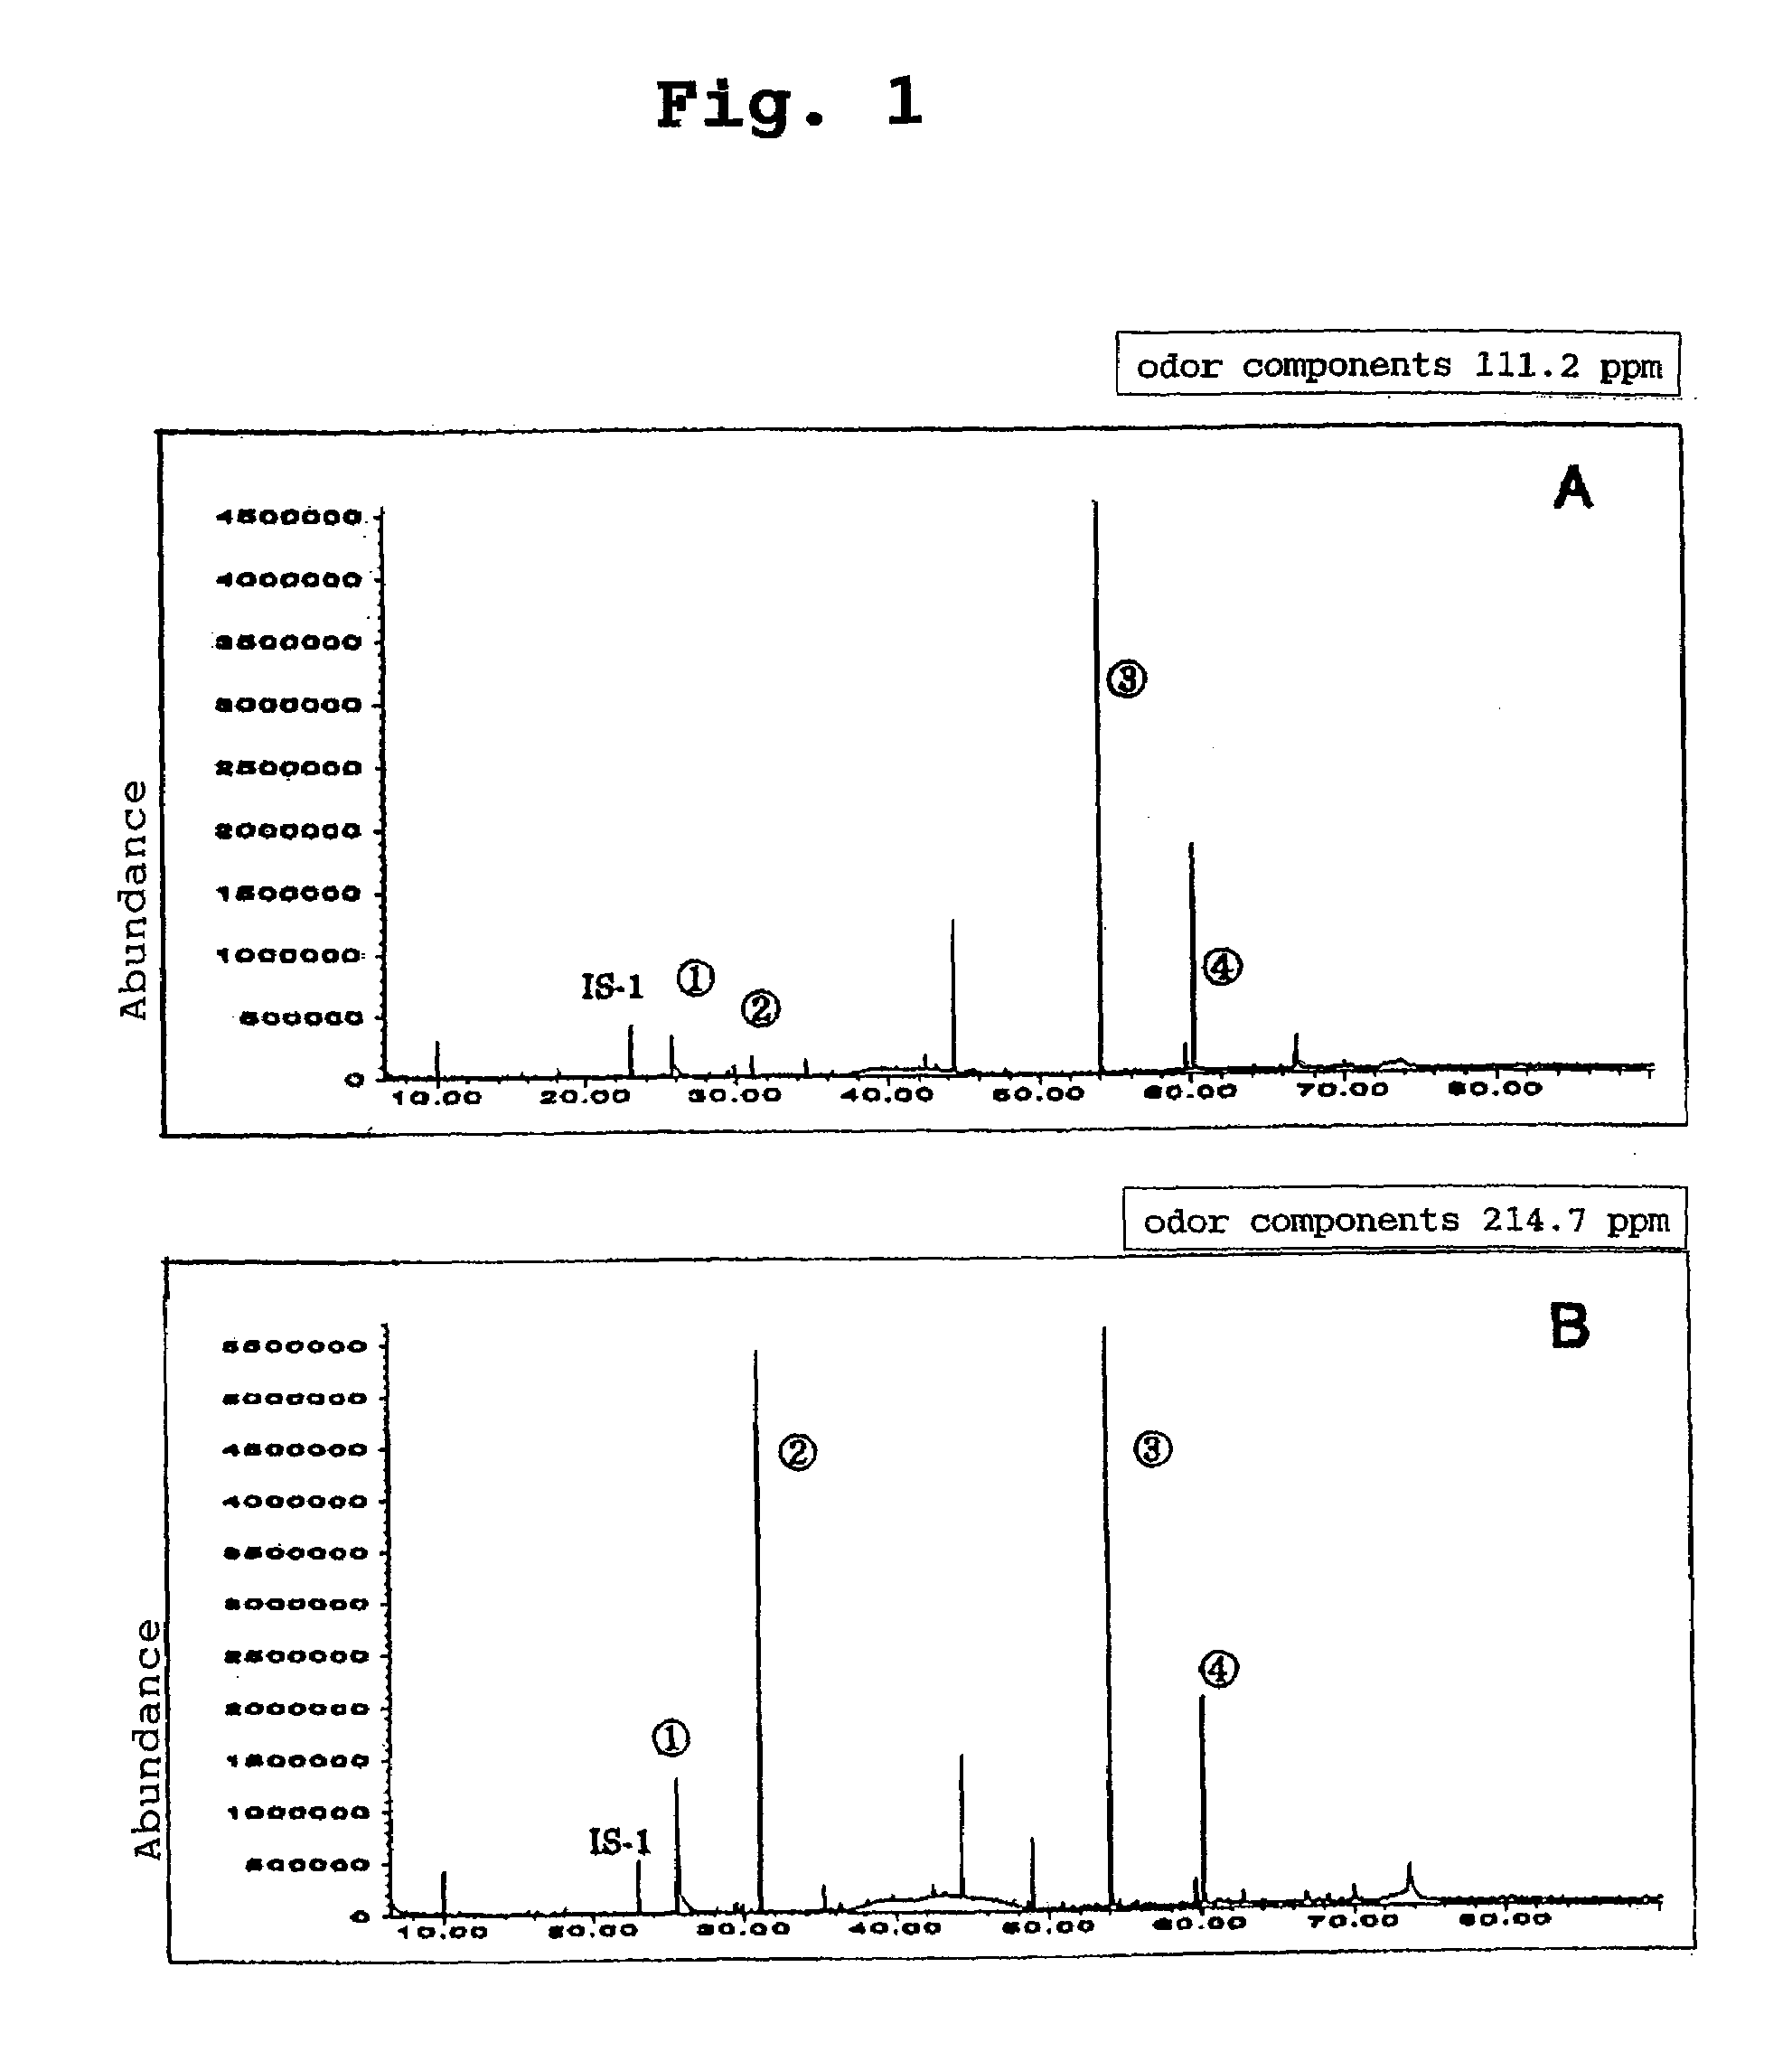 Method of preparing a purified purple corn coloring agent